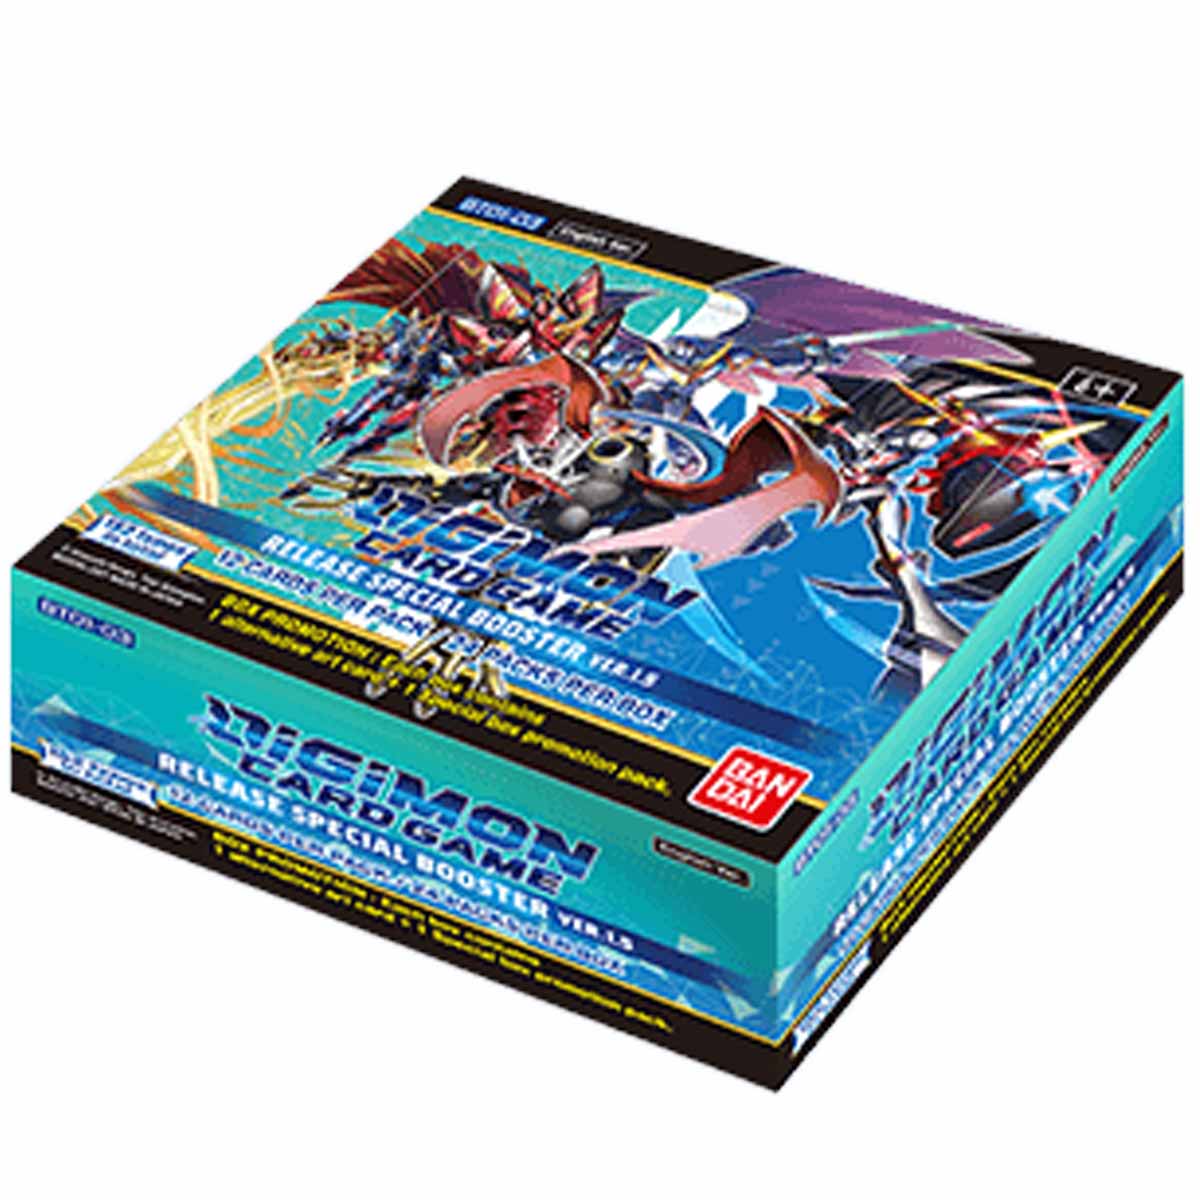 Release Special Booster Display Ver.1.5 BT01-03 - Digimon Card Game